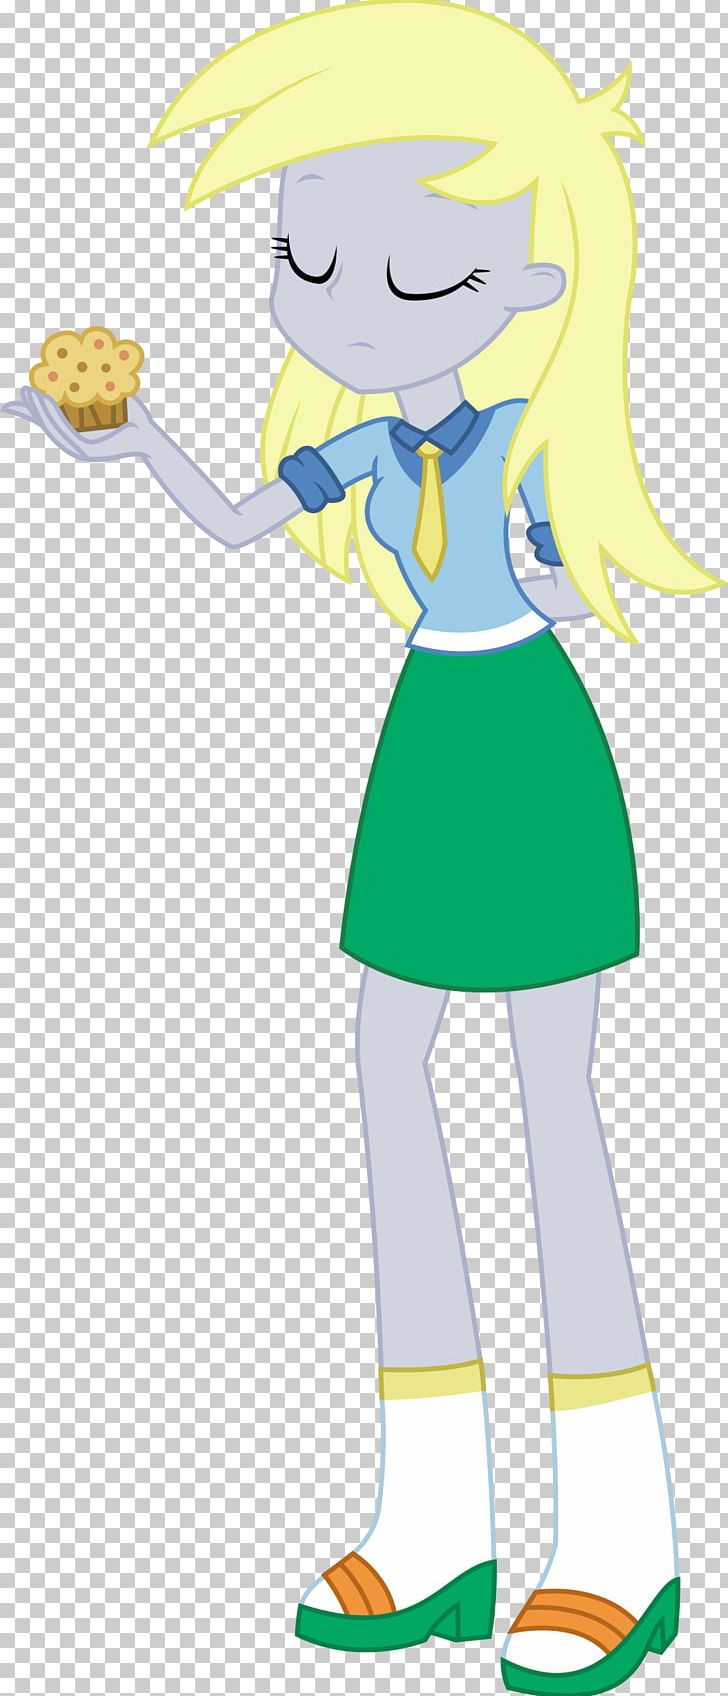 Derpy Hooves My Little Pony: Equestria Girls PNG, Clipart, Boy, Cartoon, Child, Deviantart, Equestria Free PNG Download